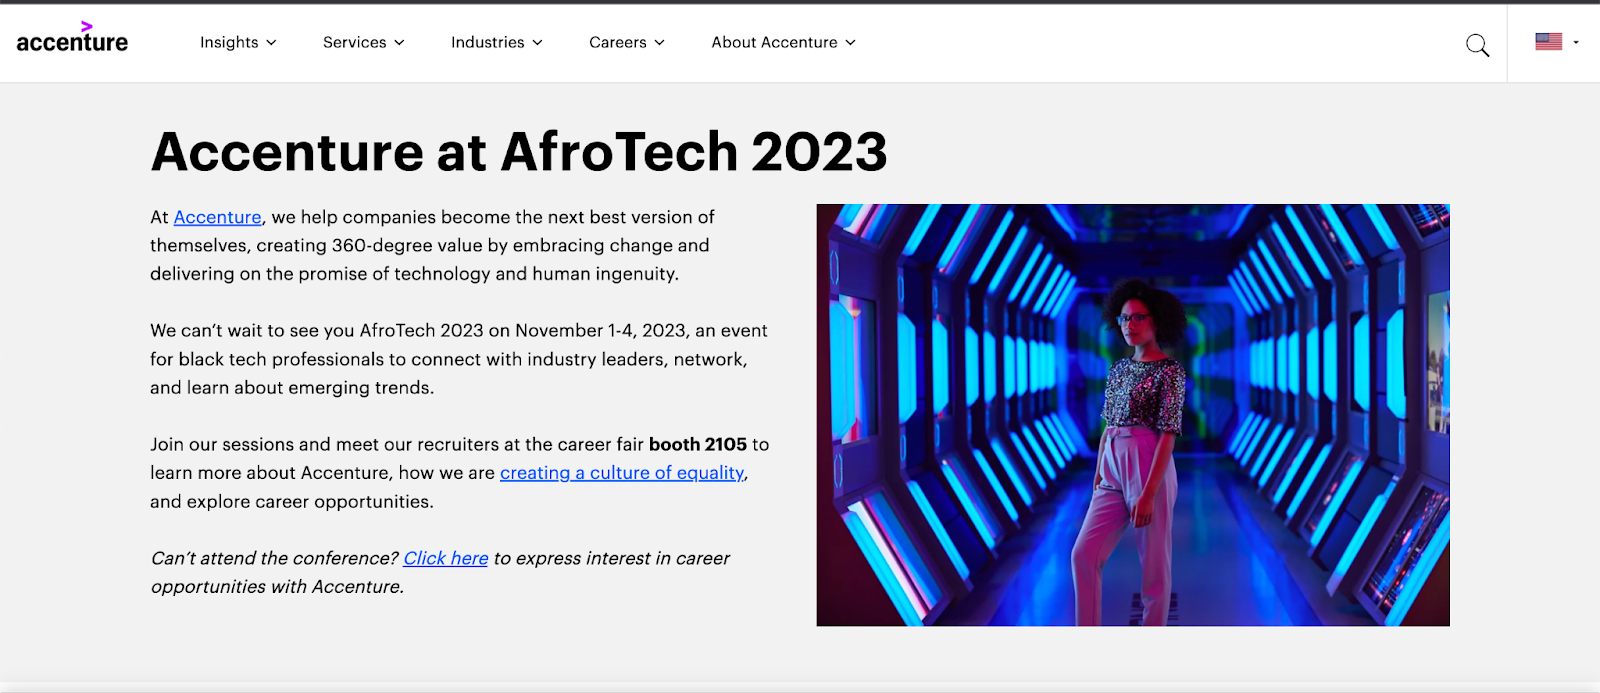 A screenshot from Accenture’s “Accenture at AfroTech 2023” webpage. 